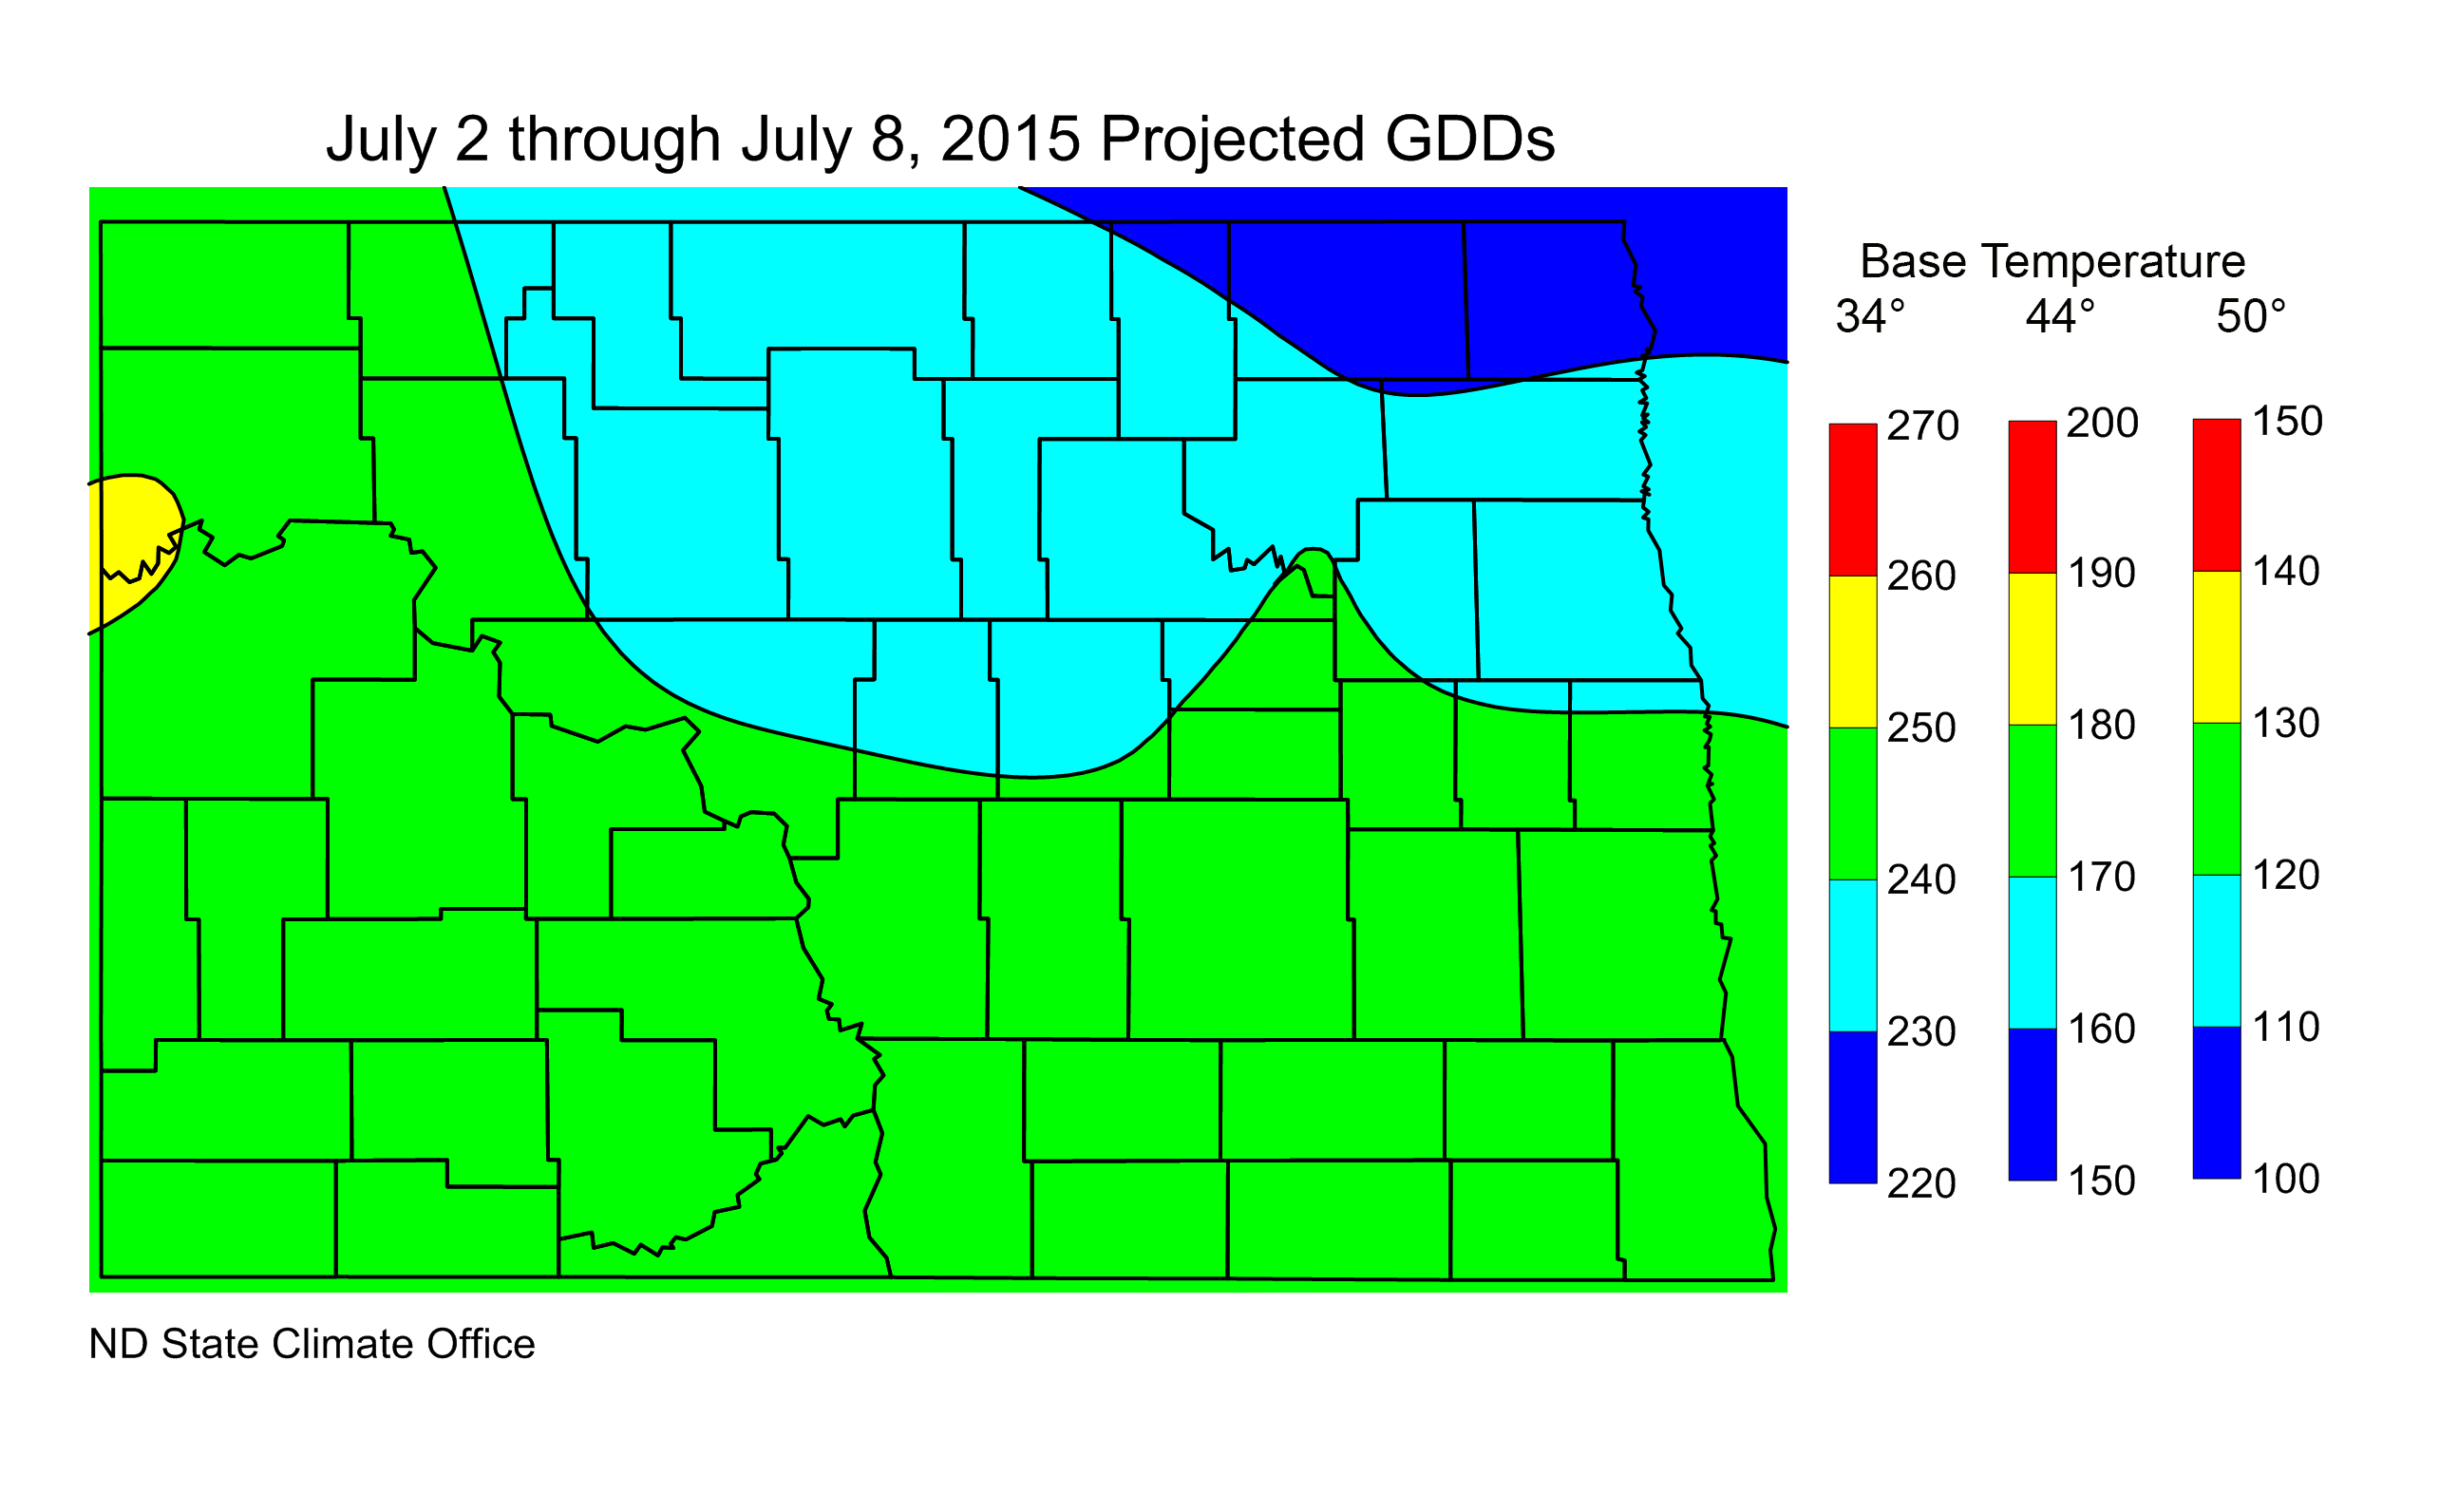 Figure 3.  Estimated Growing Degree Days for the period from July 2 to July 8